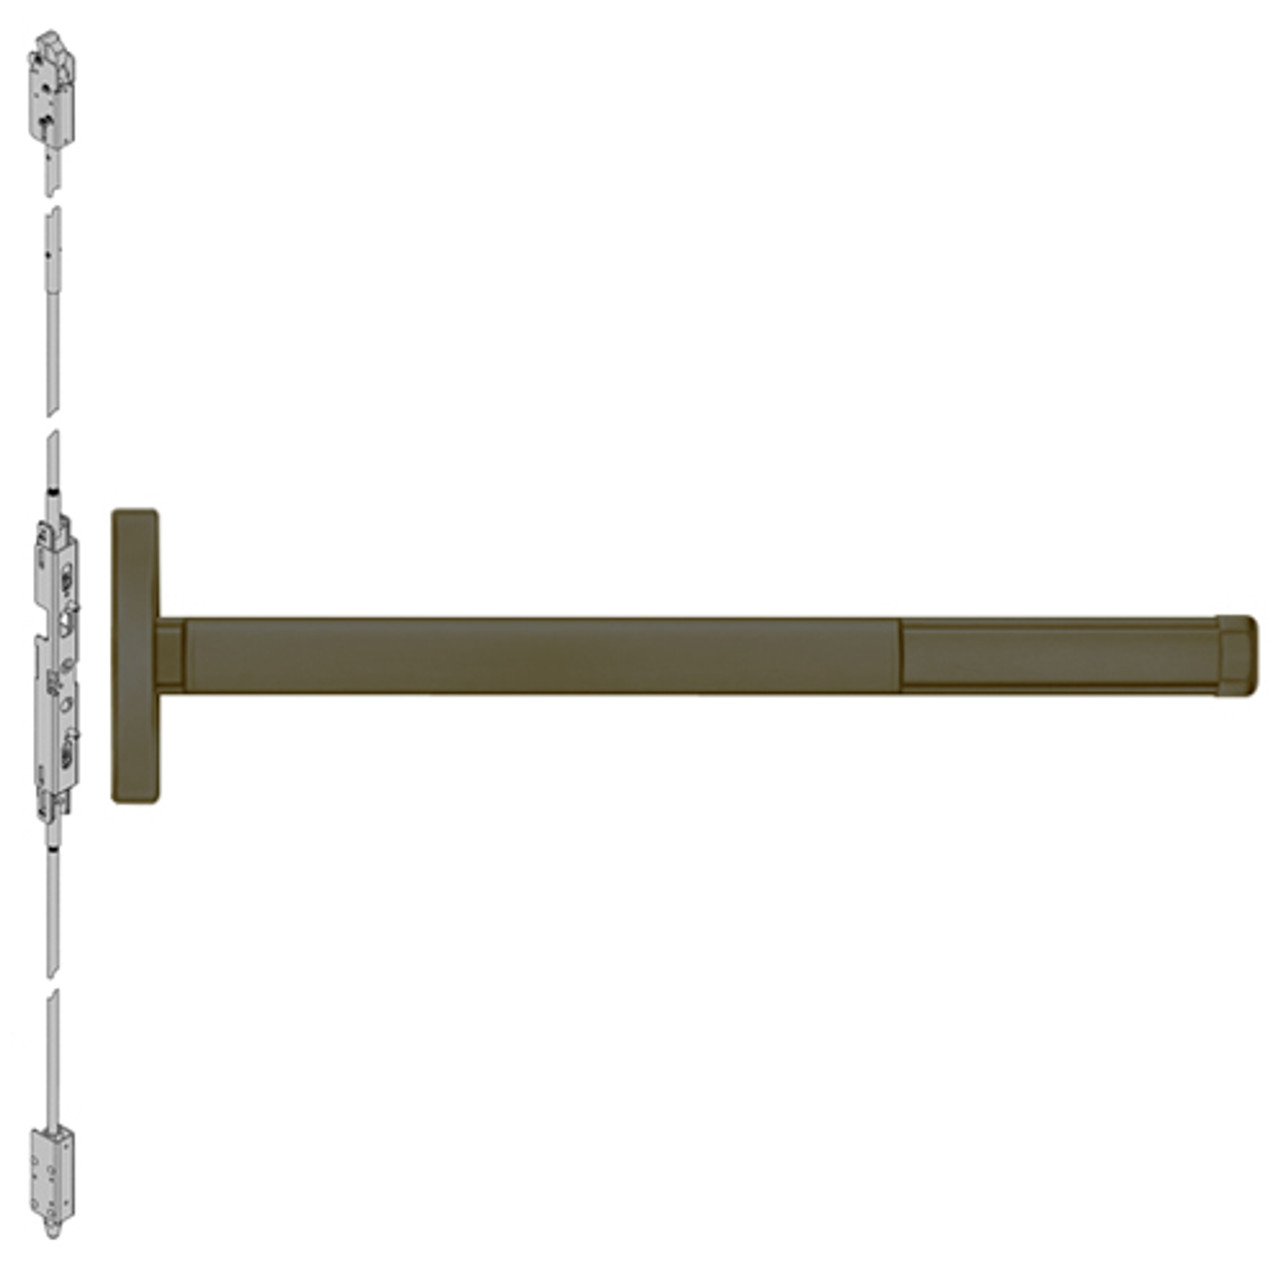 2608LBRCD-613-36 PHI 2600 Series Non Fire Rated Concealed Vertical Rod Exit Device Prepped for Key Controls Lever with Cylinder Dogging and LBR in Oil Rubbed Bronze Finish